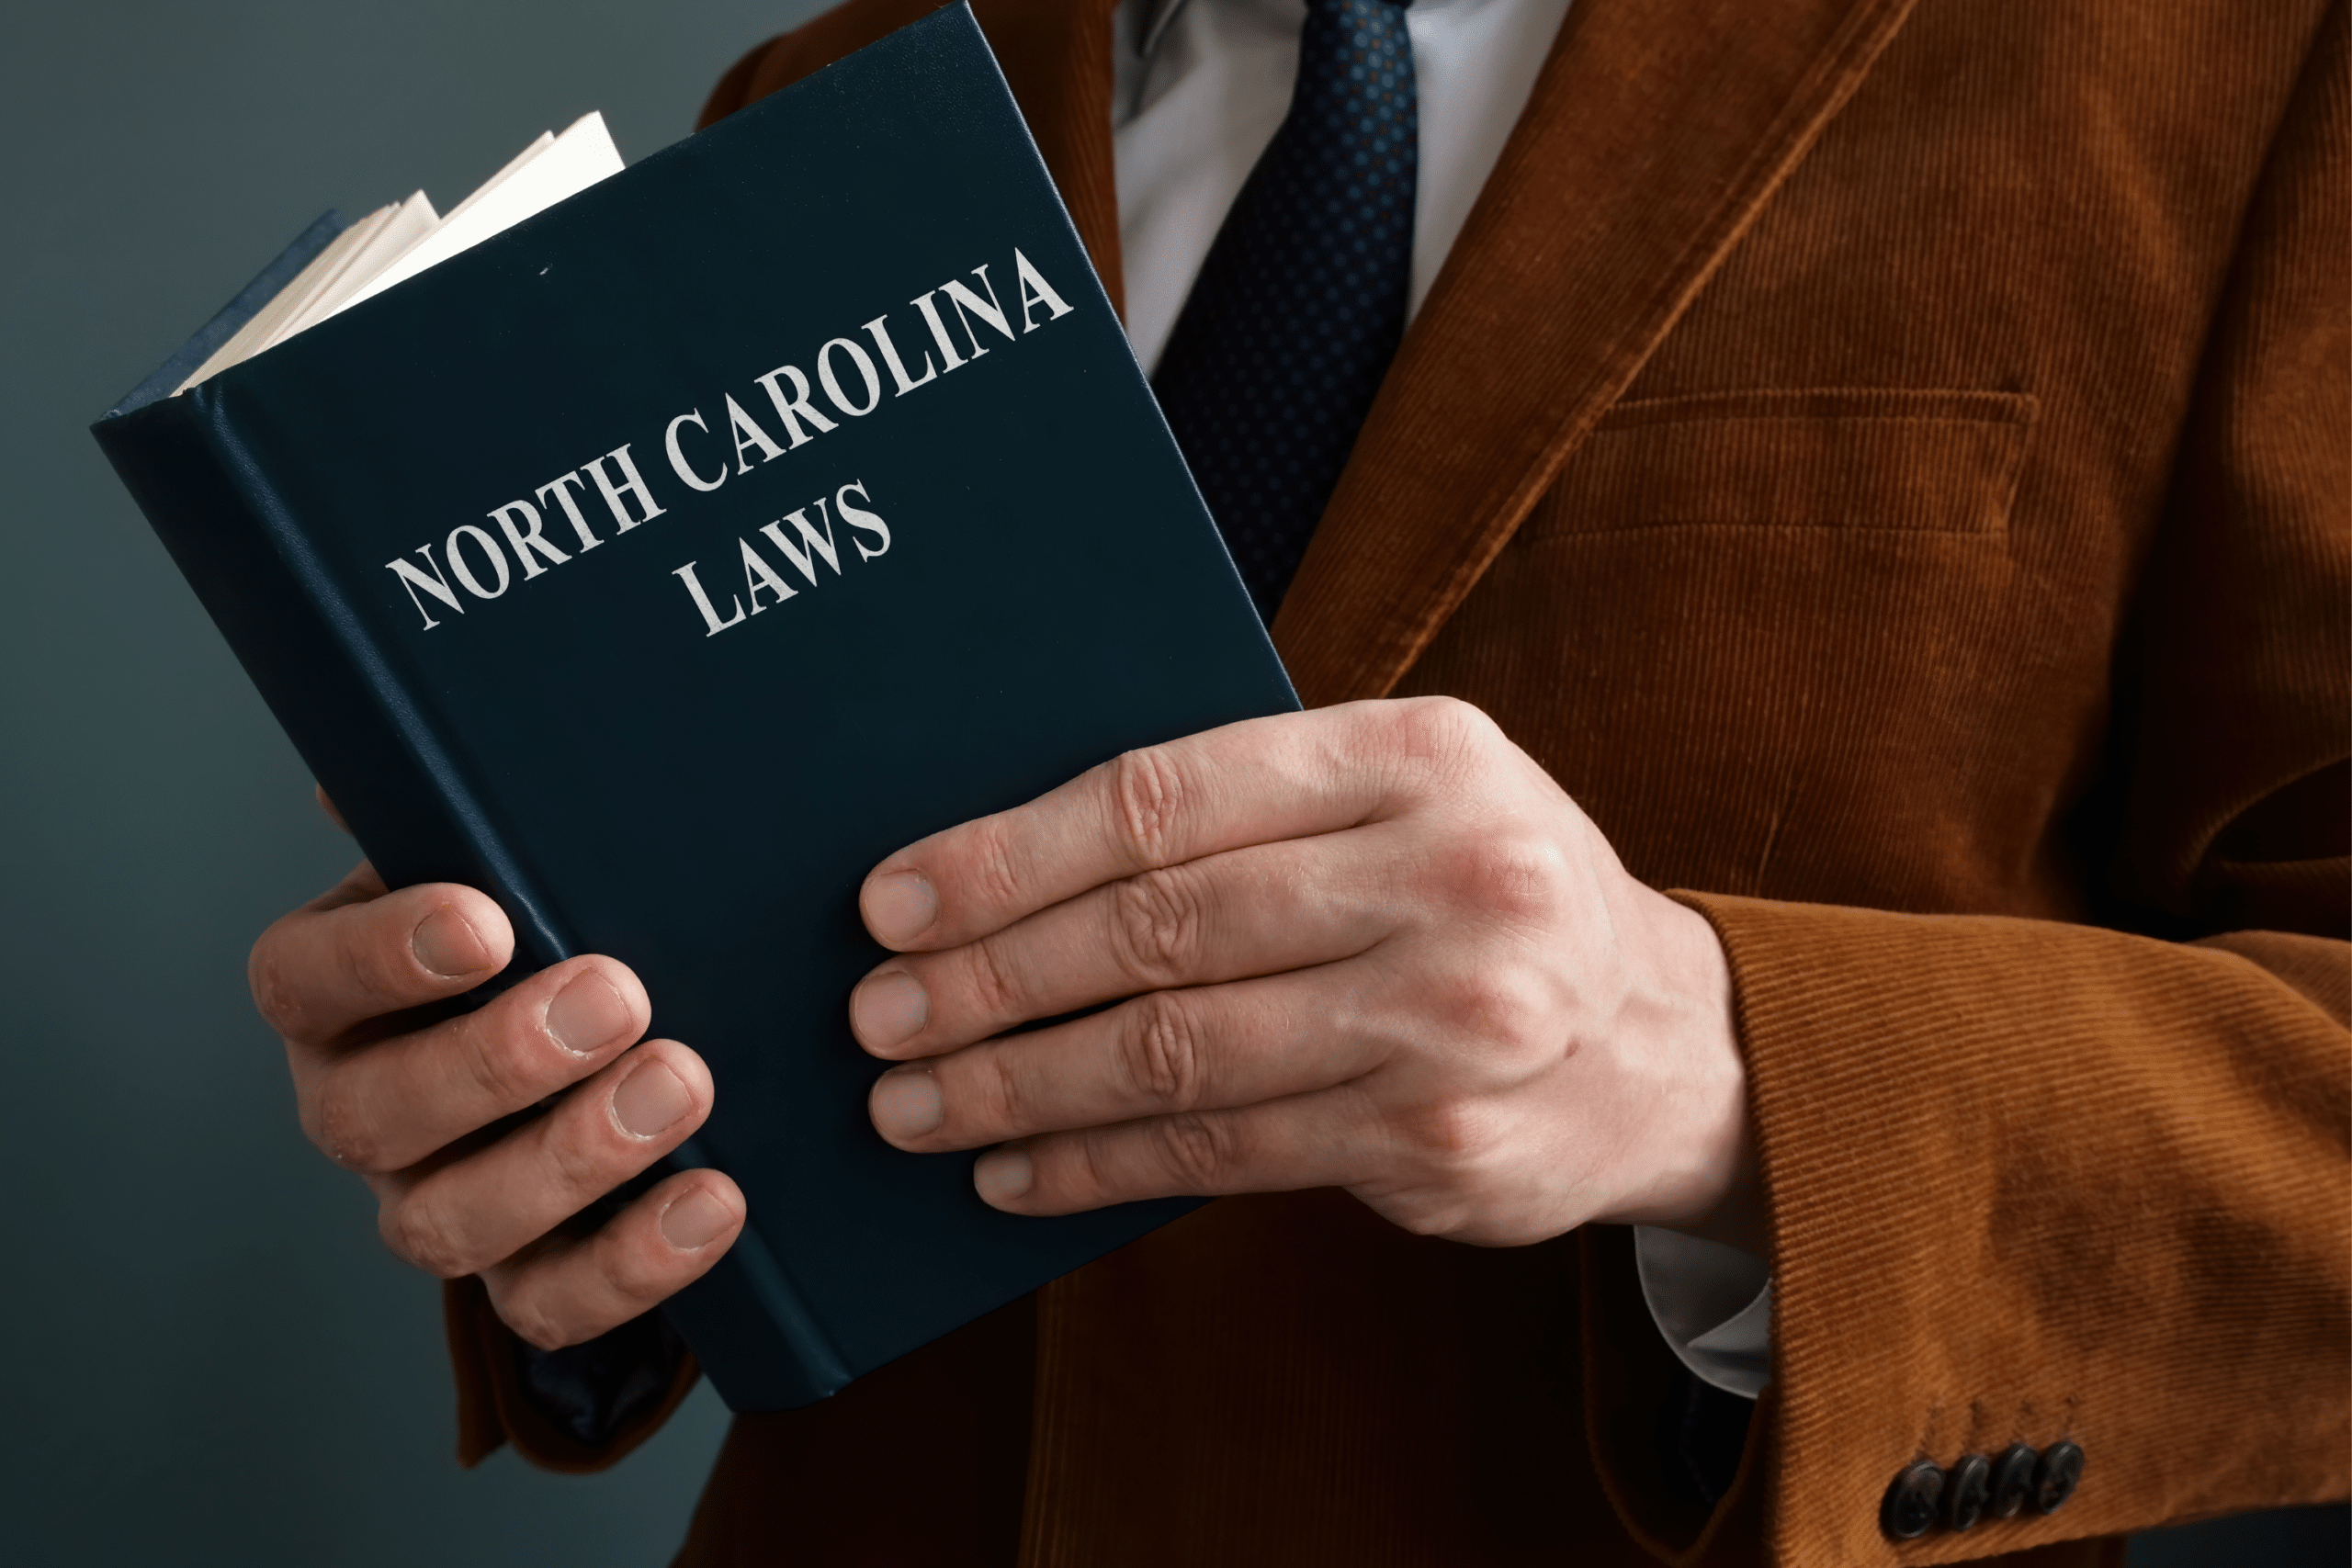 Online Harassment and Cyberbullying: NC Laws